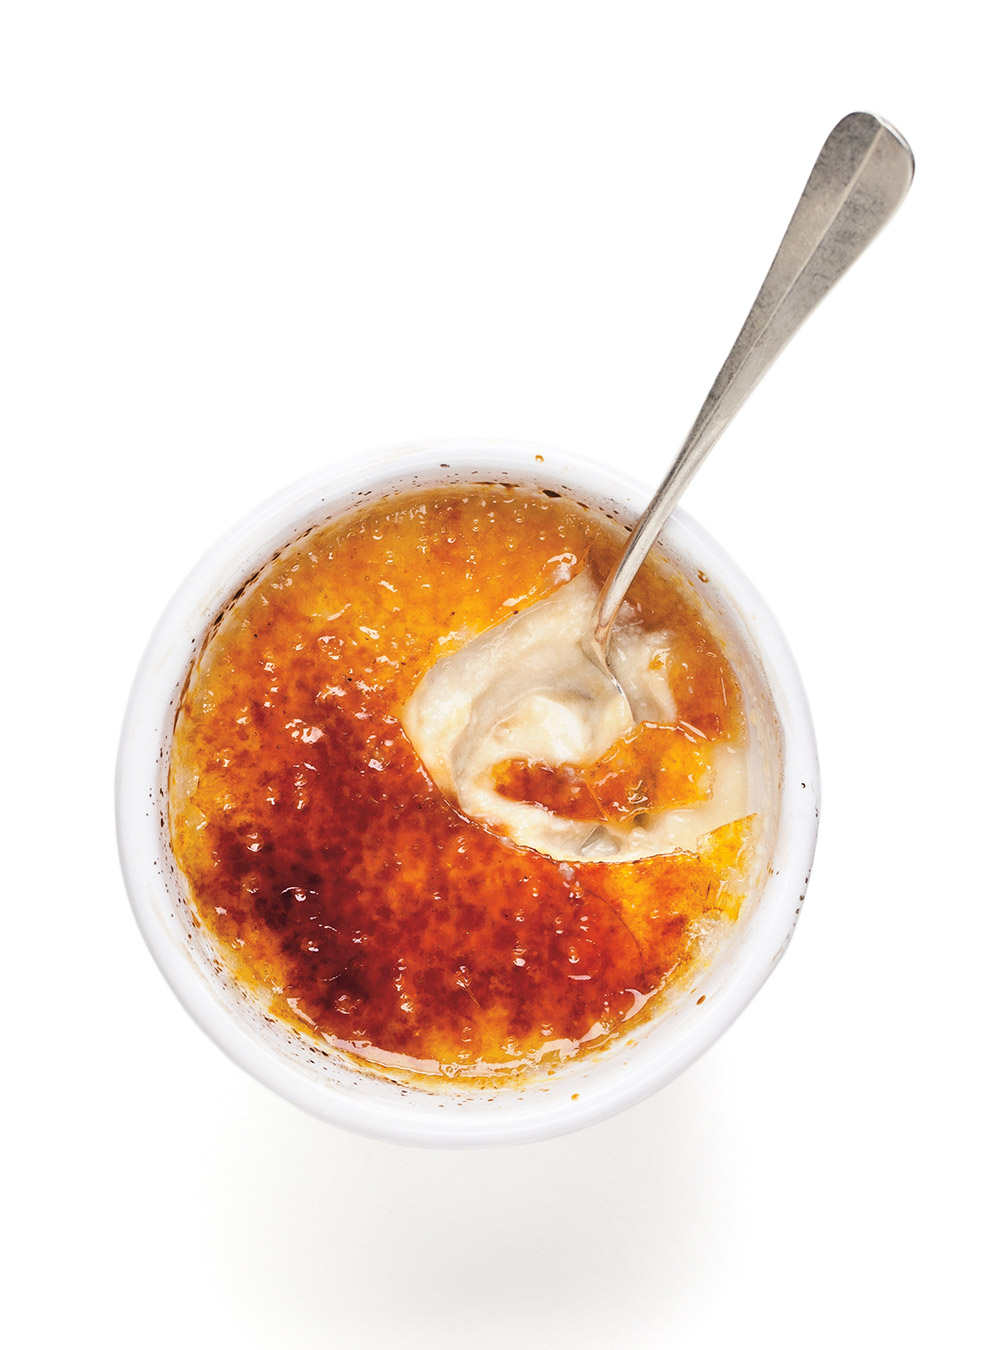 Eric Lechasseur’s (Madonna’s chef) Eggless and Creamless Crème Brulée